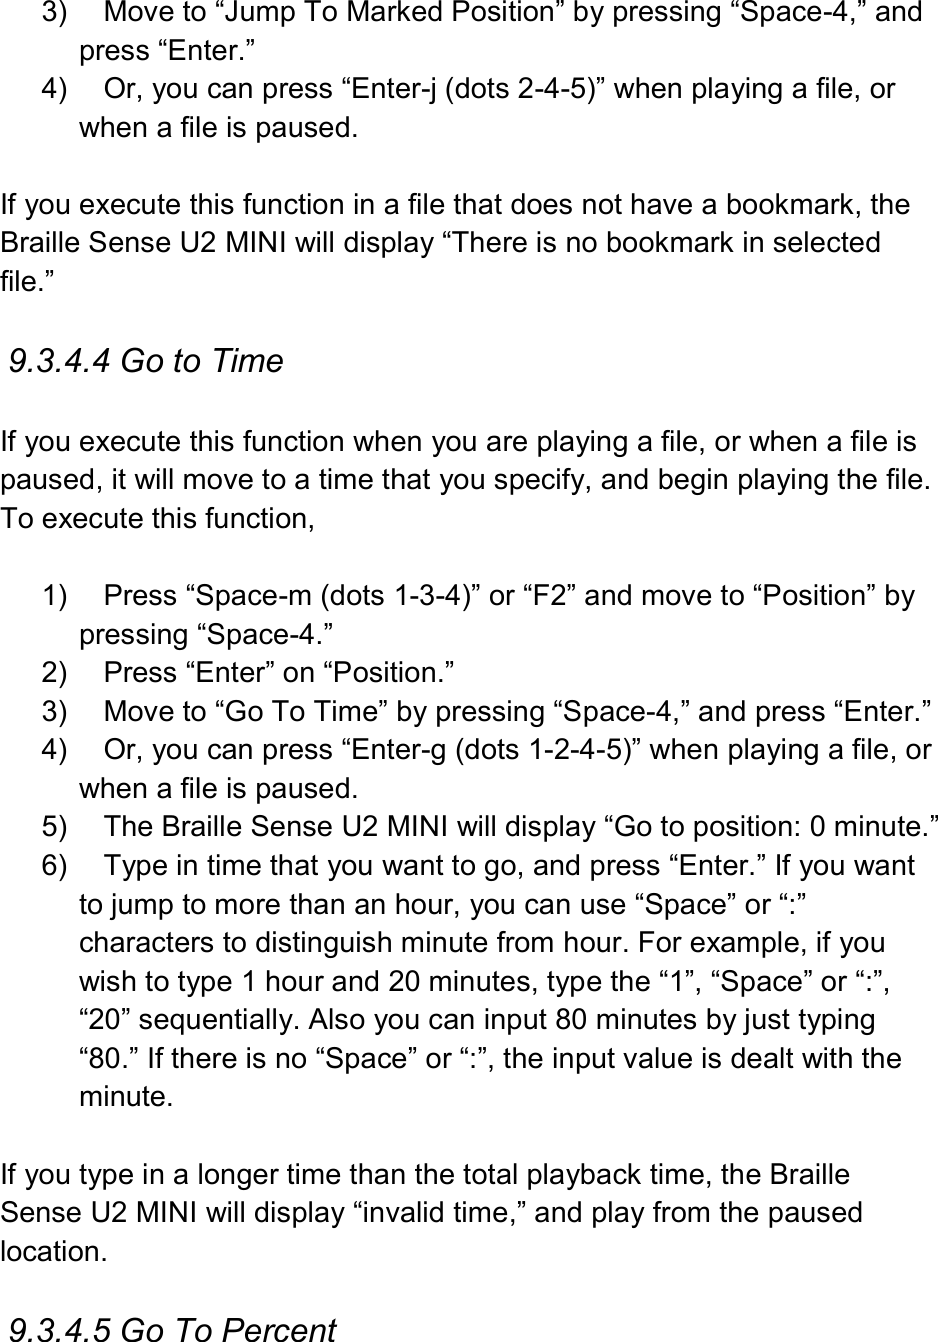  3)  Move to “Jump To Marked Position” by pressing “Space-4,” and press “Enter.” 4)  Or, you can press “Enter-j (dots 2-4-5)” when playing a file, or when a file is paused.  If you execute this function in a file that does not have a bookmark, the Braille Sense U2 MINI will display “There is no bookmark in selected file.”  9.3.4.4 Go to Time  If you execute this function when you are playing a file, or when a file is paused, it will move to a time that you specify, and begin playing the file. To execute this function,    1)  Press “Space-m (dots 1-3-4)” or “F2” and move to “Position” by pressing “Space-4.” 2)  Press “Enter” on “Position.” 3)  Move to “Go To Time” by pressing “Space-4,” and press “Enter.” 4)  Or, you can press “Enter-g (dots 1-2-4-5)” when playing a file, or when a file is paused. 5)  The Braille Sense U2 MINI will display “Go to position: 0 minute.” 6)  Type in time that you want to go, and press “Enter.” If you want to jump to more than an hour, you can use “Space” or “:” characters to distinguish minute from hour. For example, if you wish to type 1 hour and 20 minutes, type the “1”, “Space” or “:”, “20” sequentially. Also you can input 80 minutes by just typing “80.” If there is no “Space” or “:”, the input value is dealt with the minute.  If you type in a longer time than the total playback time, the Braille Sense U2 MINI will display “invalid time,” and play from the paused location.  9.3.4.5 Go To Percent  